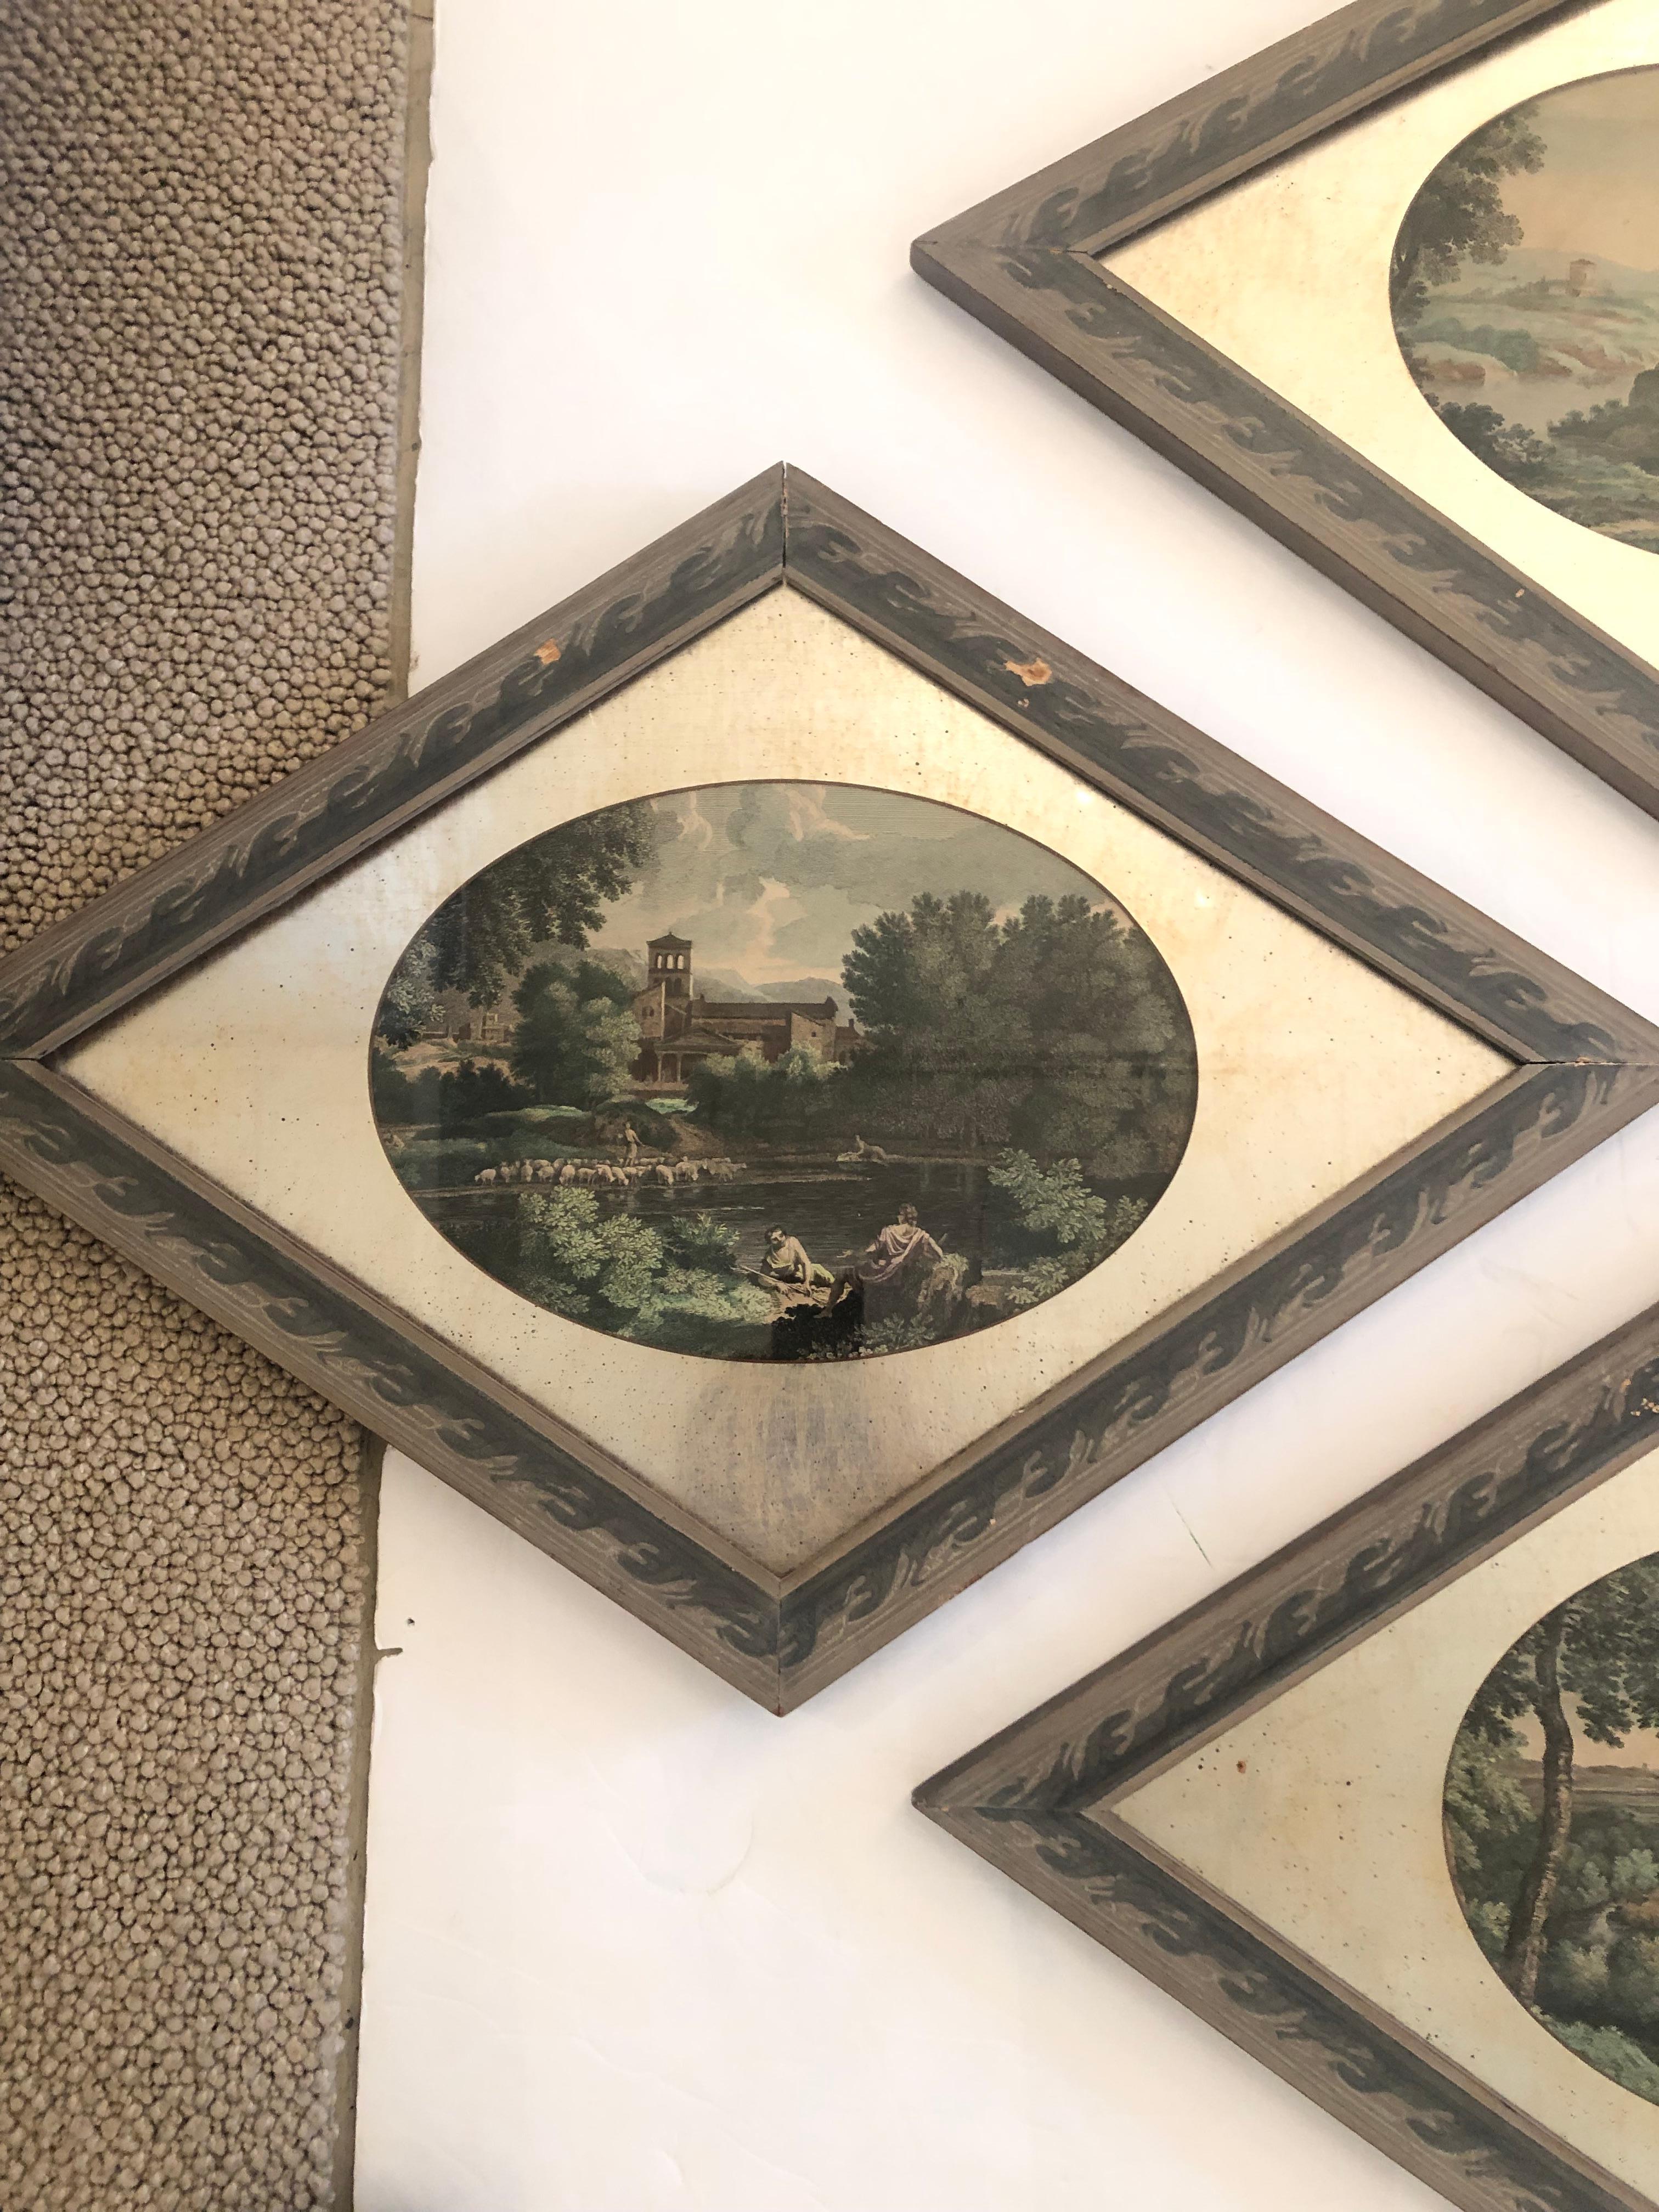 Set of 4 unusual diamond shaped prints having matte rustic wood frames and oval romantic Renaissance style landscapes with bathers and riders in bucolic settings. The matts are silver foil and quite striking.
Look great hung together or up and down